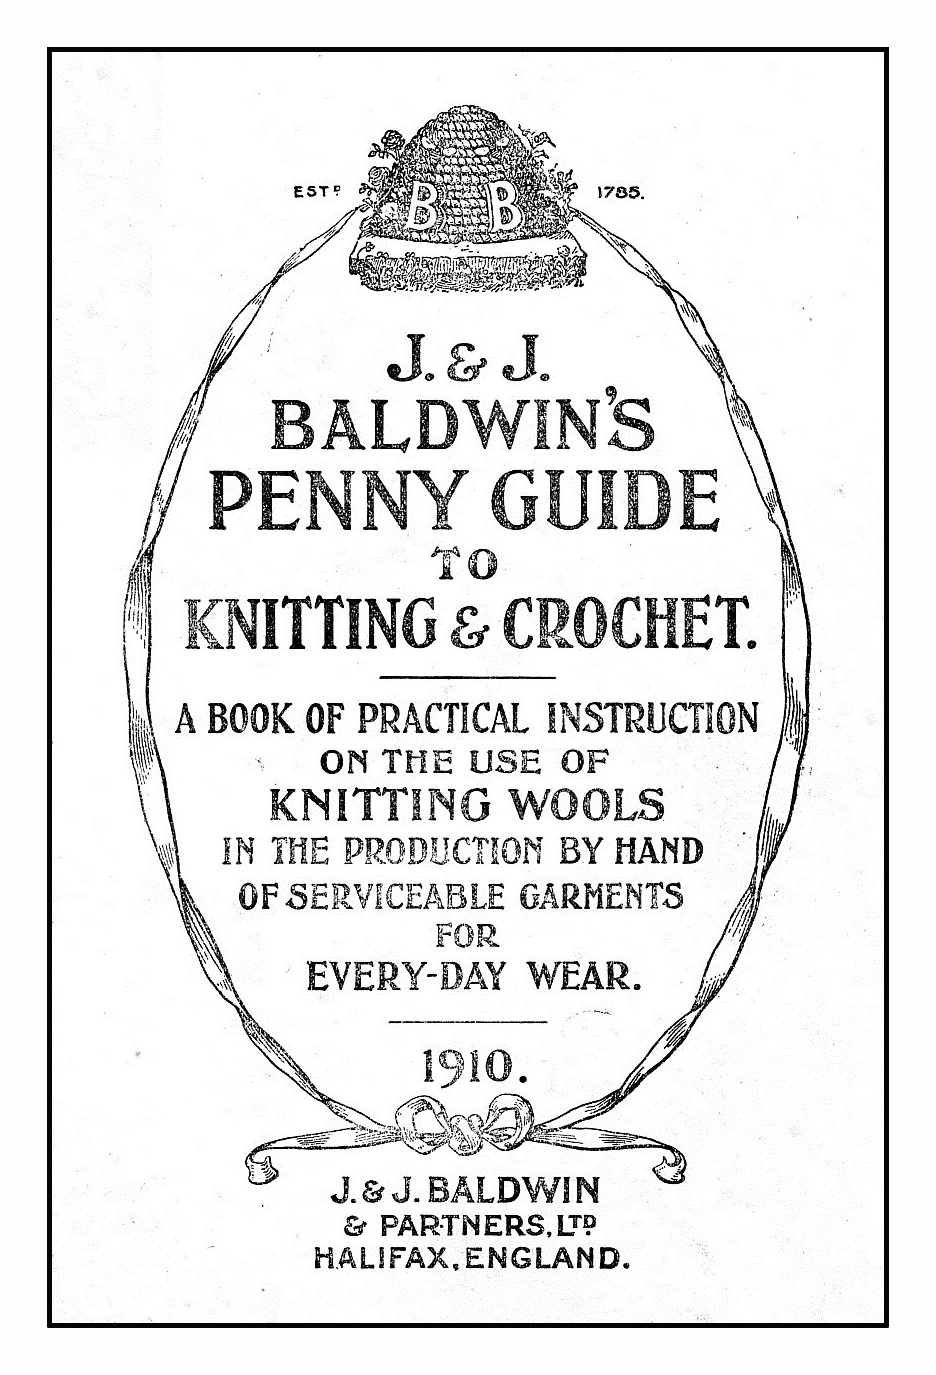 Cover of J&J Baldwins Penny Guide to Knitting & Crochet. "A book of practical instruction on the use of KNITTING WOOLS in the production by hand of serviceable garments for every-day wear. 1910